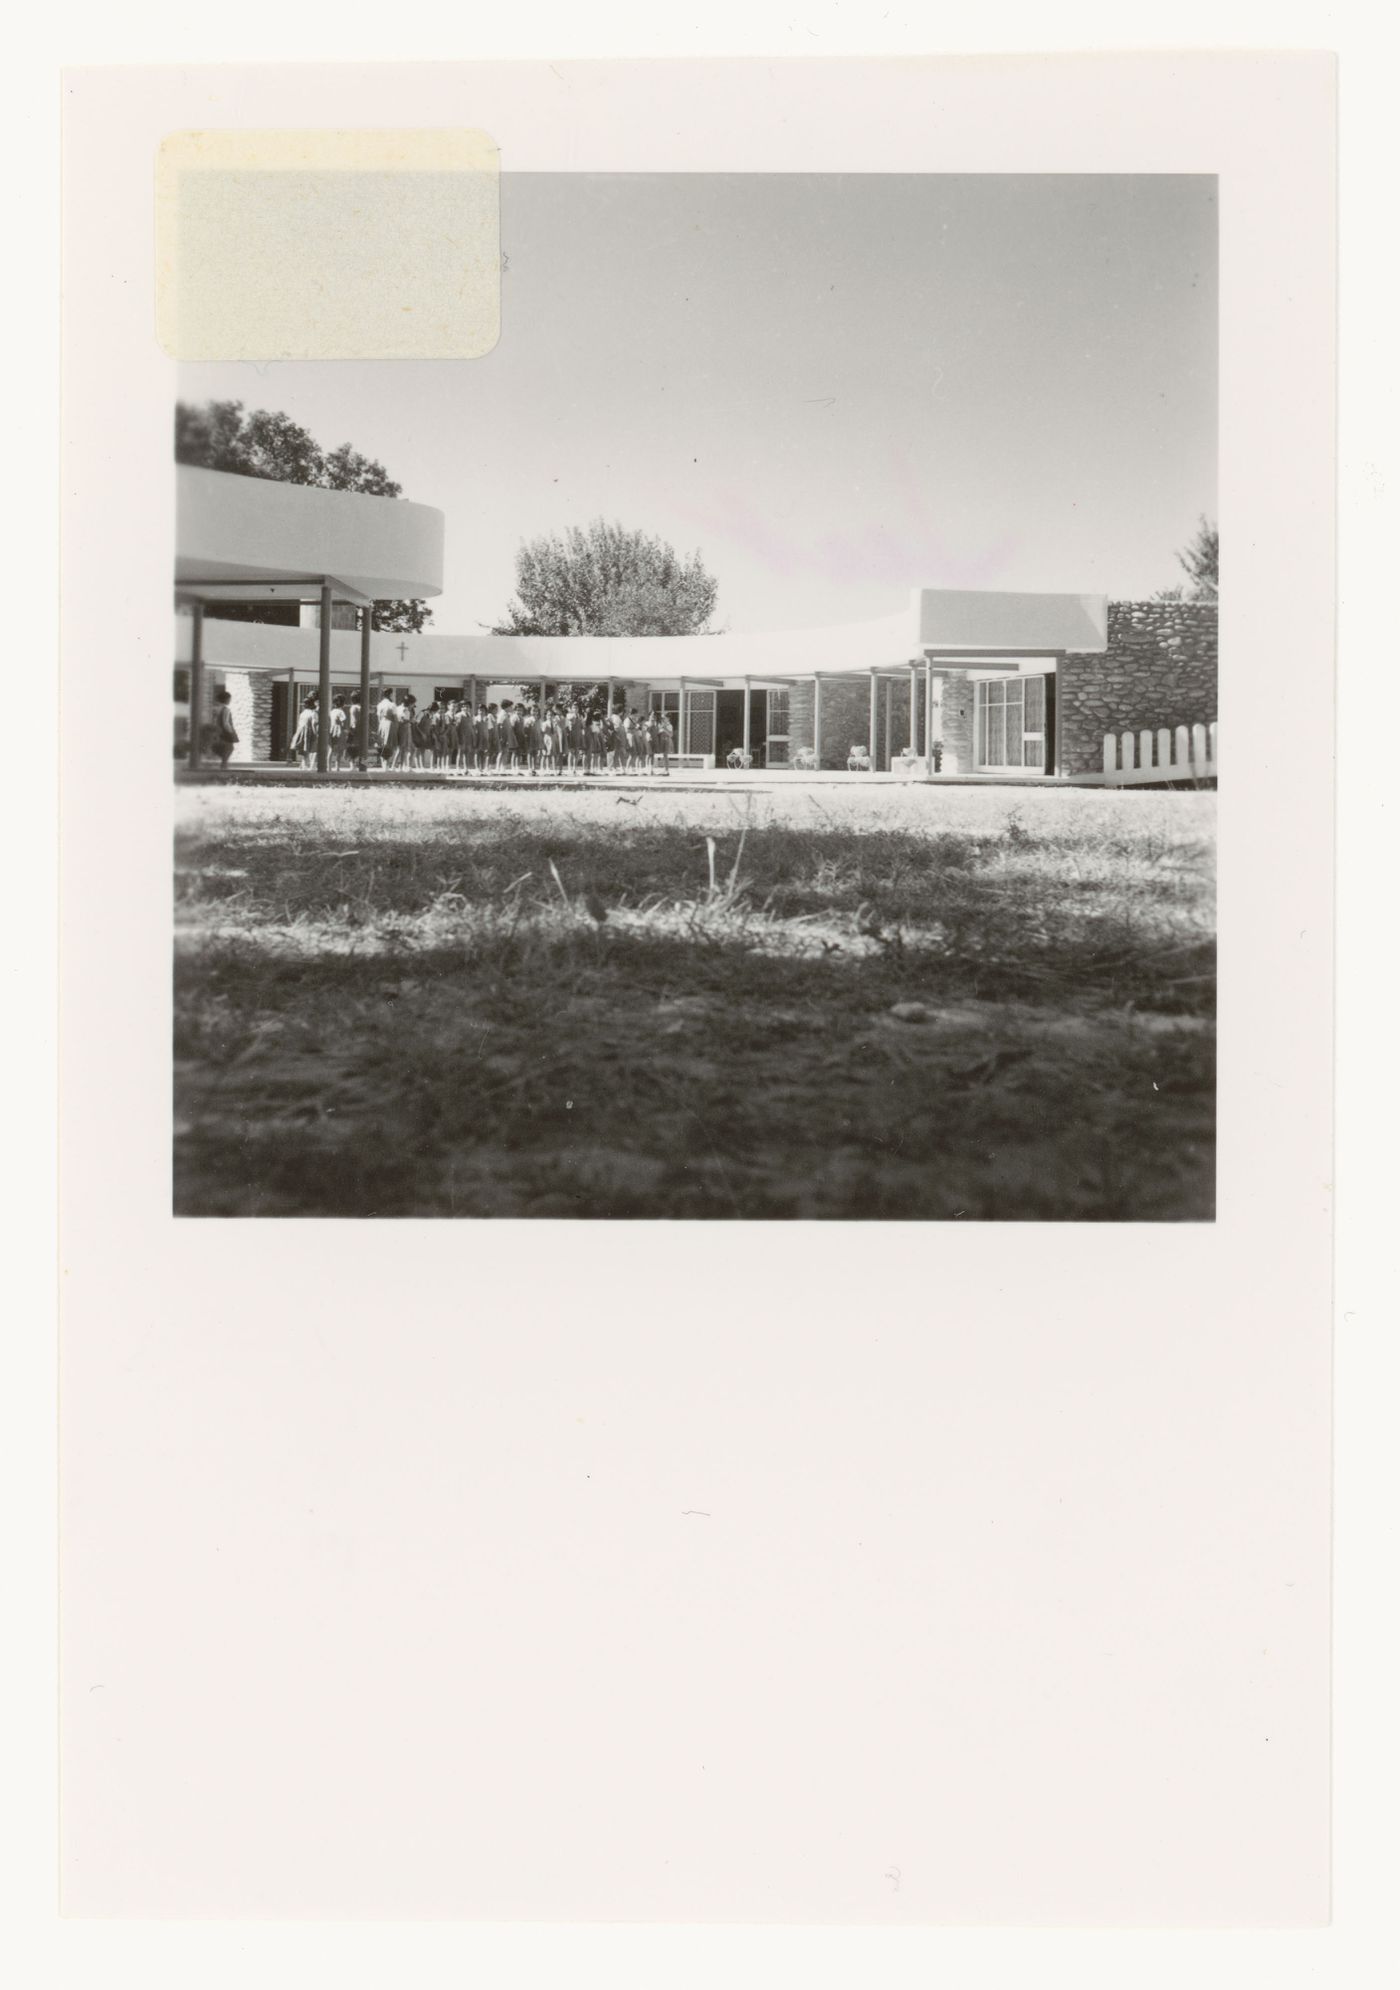 View of an unidentified building, possibly a school in Chandigarh, India